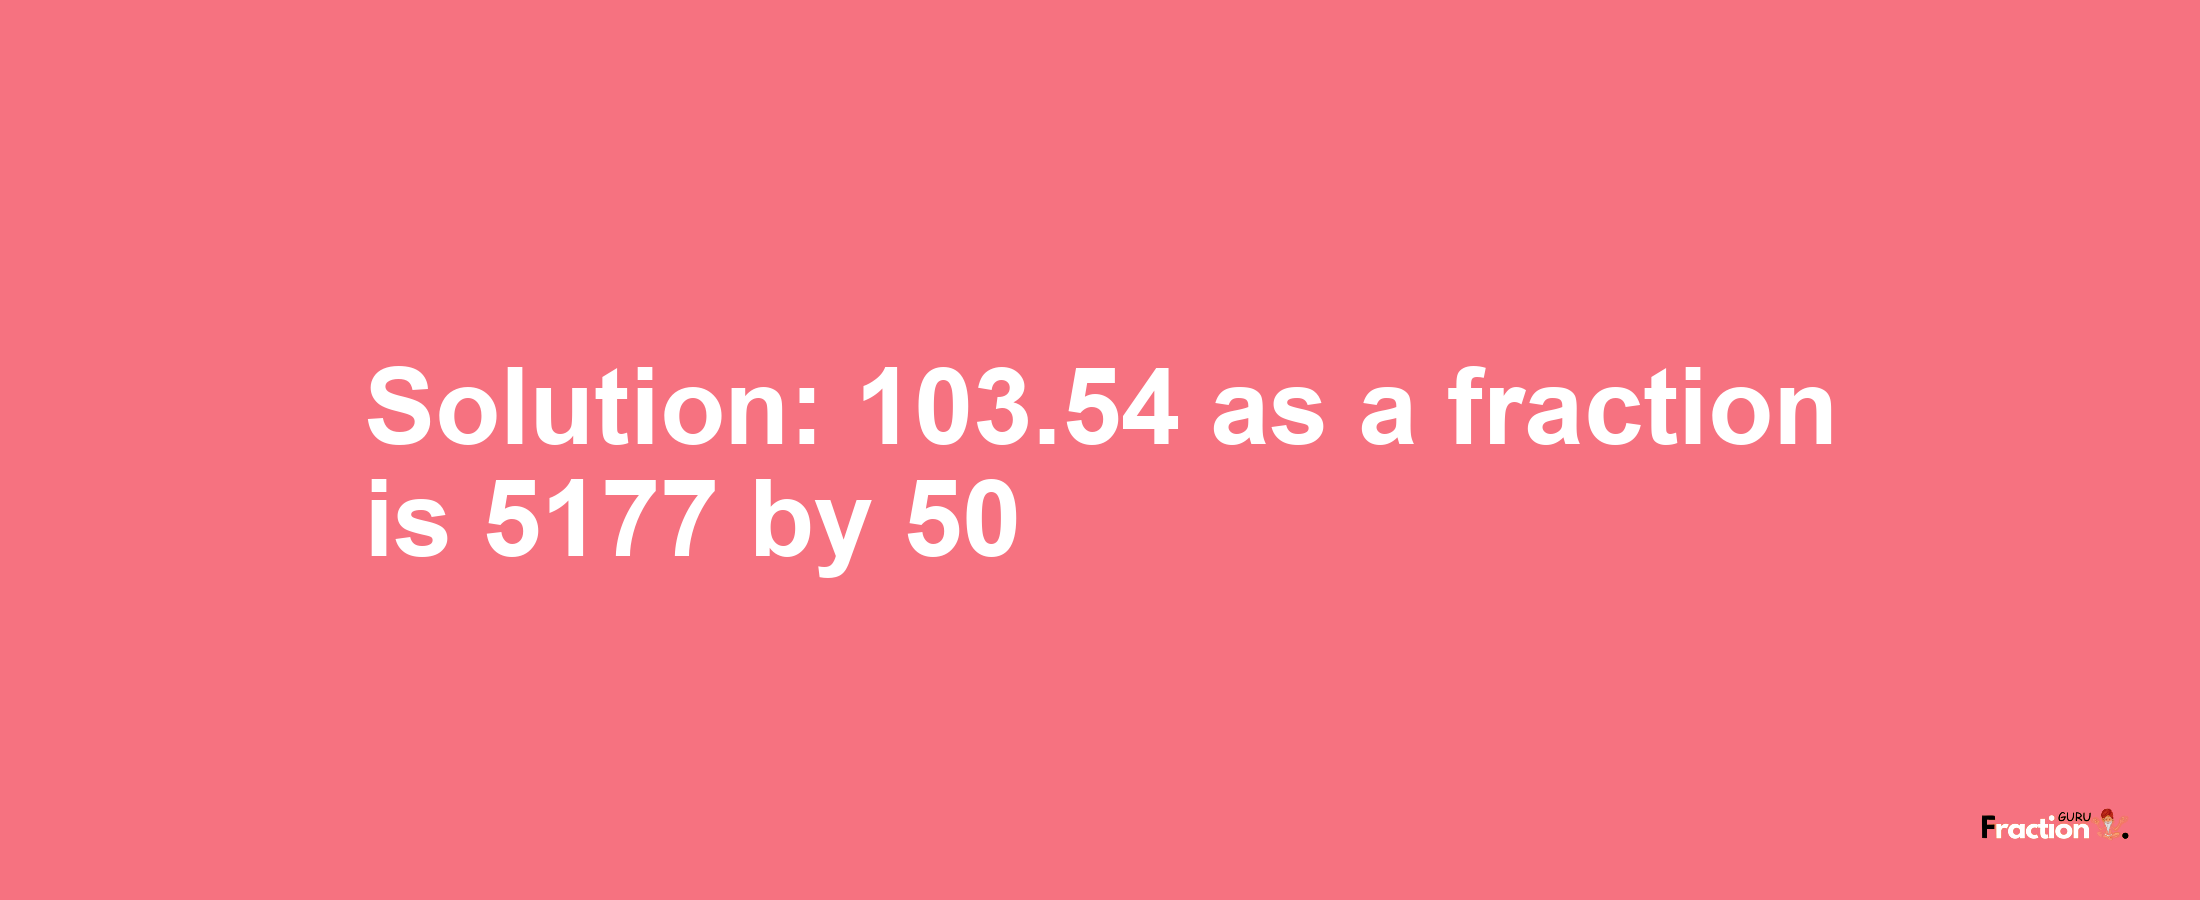 Solution:103.54 as a fraction is 5177/50